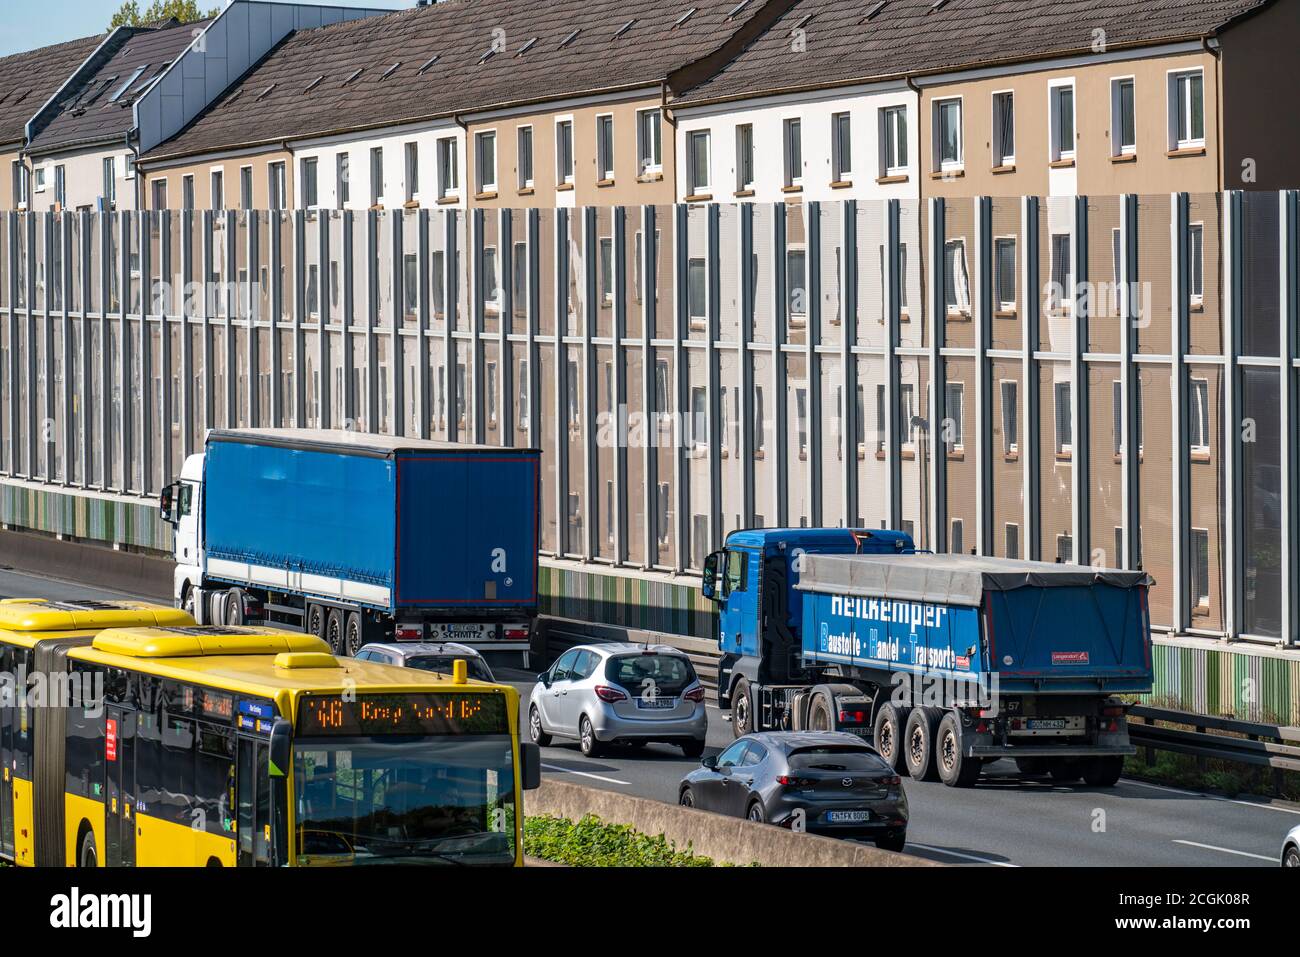 The freeway A40, Ruhrschnellweg, in Essen, residential buildings directly at the freeway, glass noise barriers, Dorstfelder Strasse, bus lane, at the Stock Photo